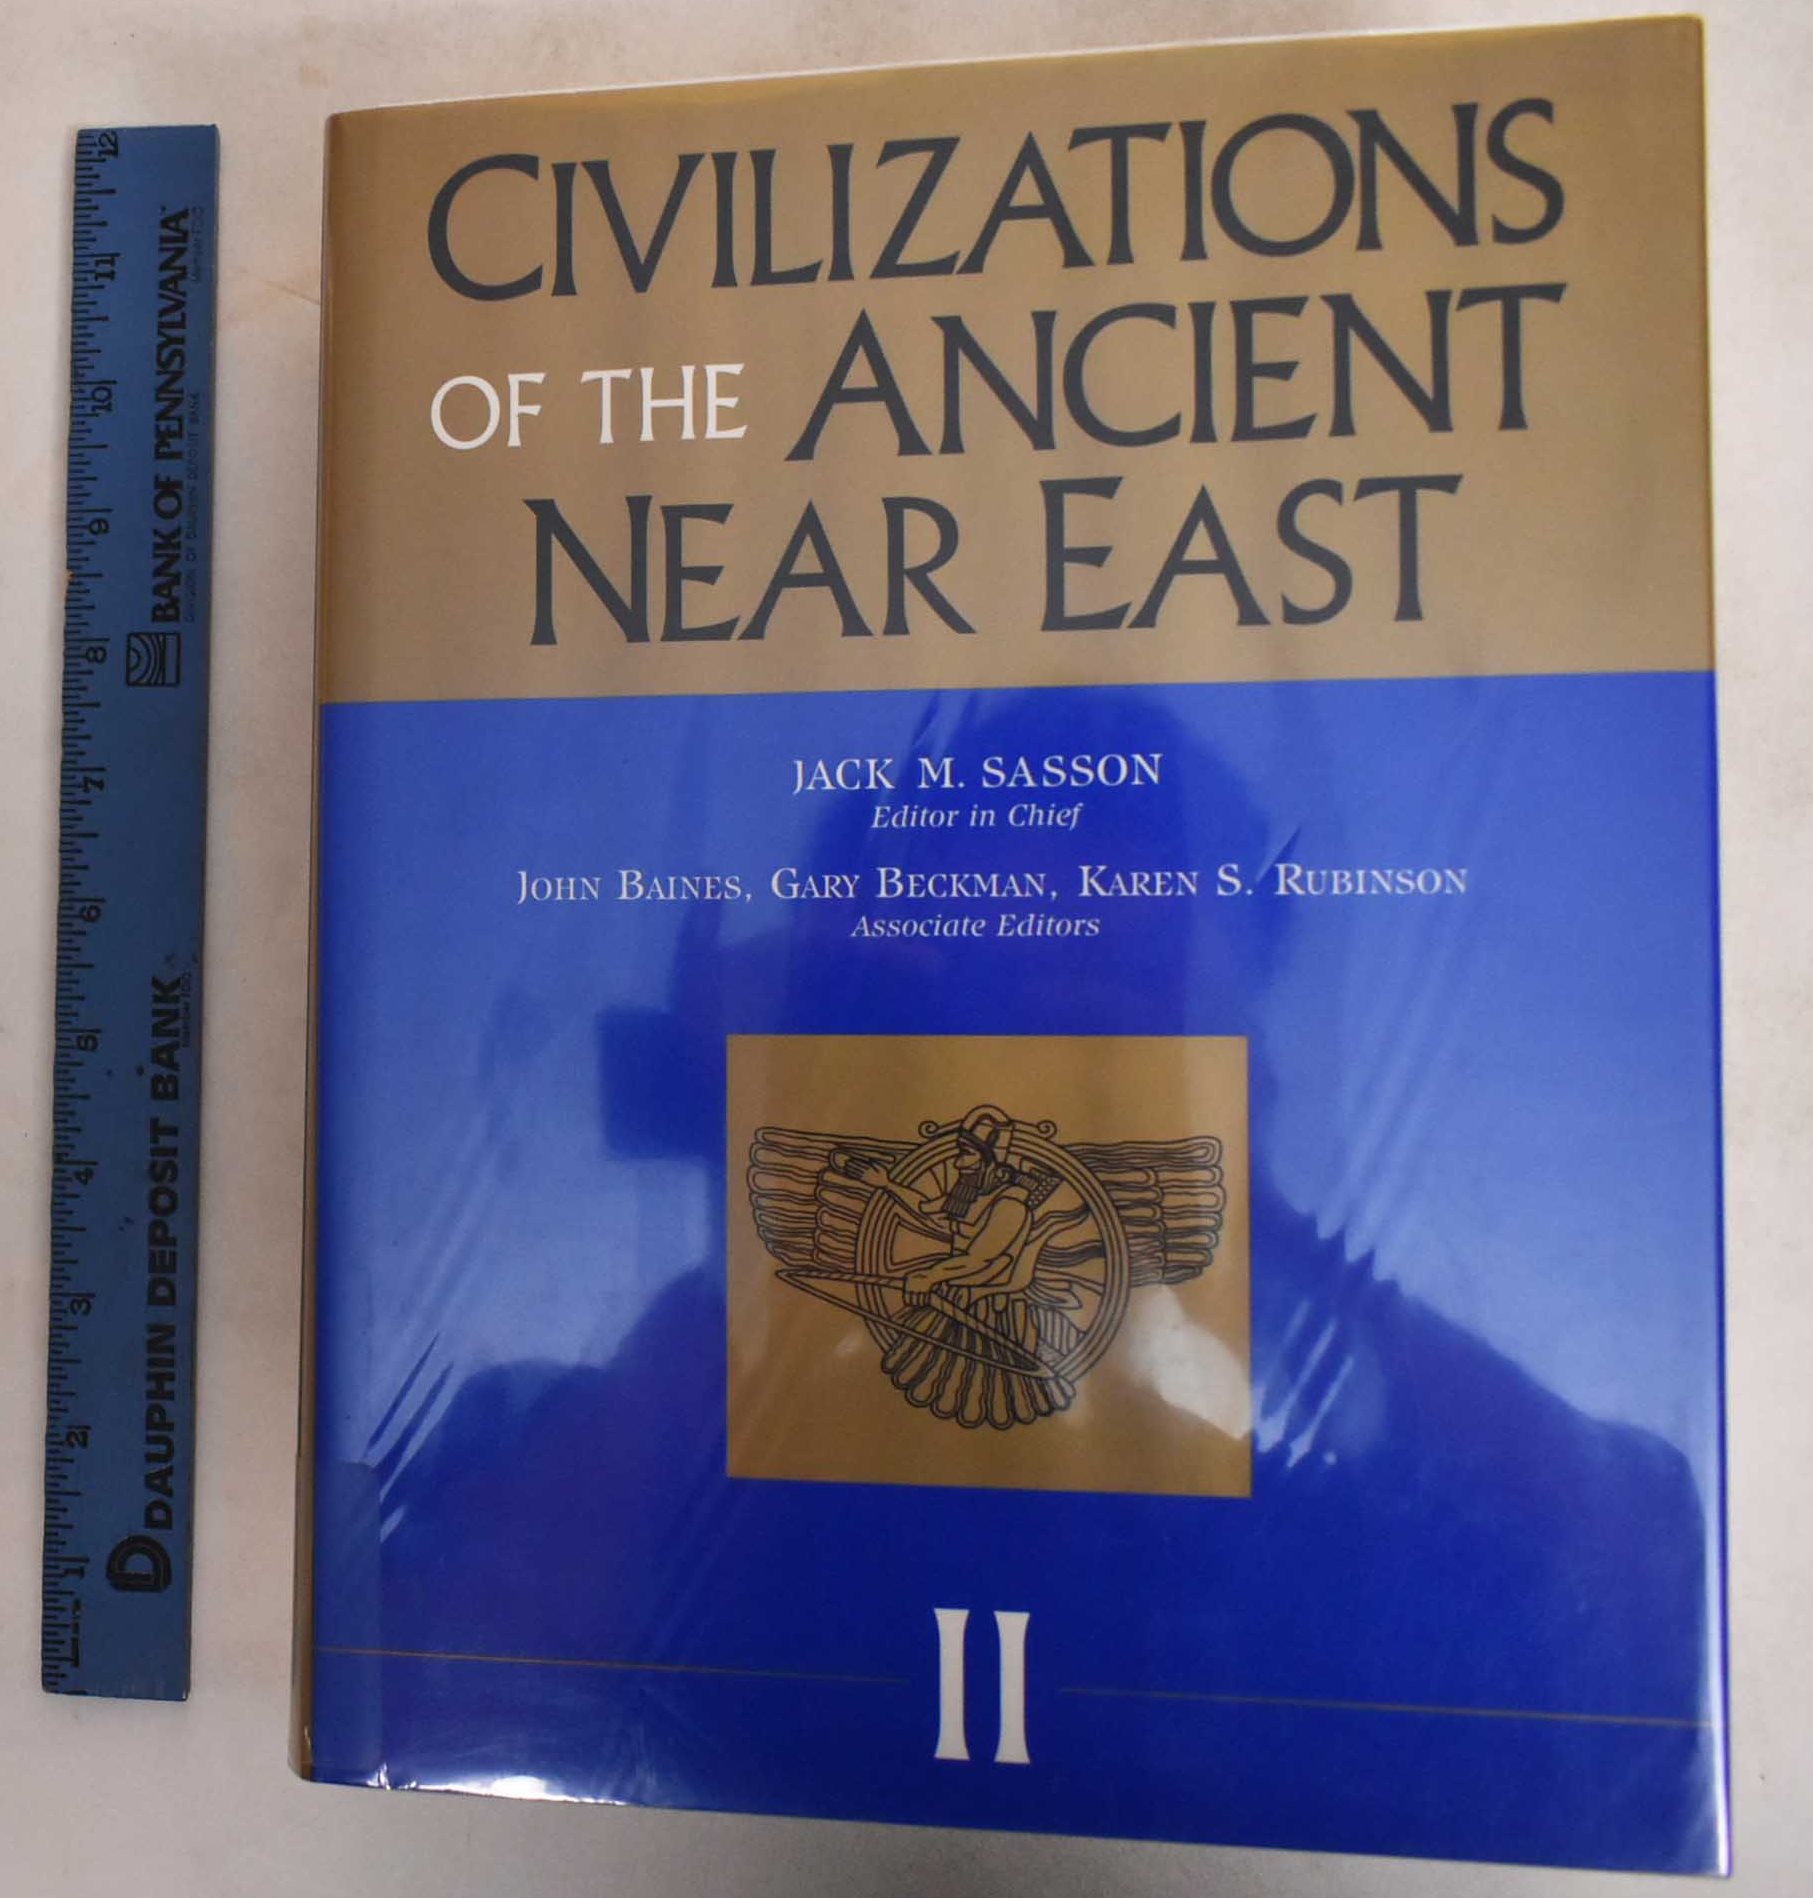 Civilizations Of The Ancient Near East (Volume II) - Sasson, Jack M. and John Baines, et al (editor)